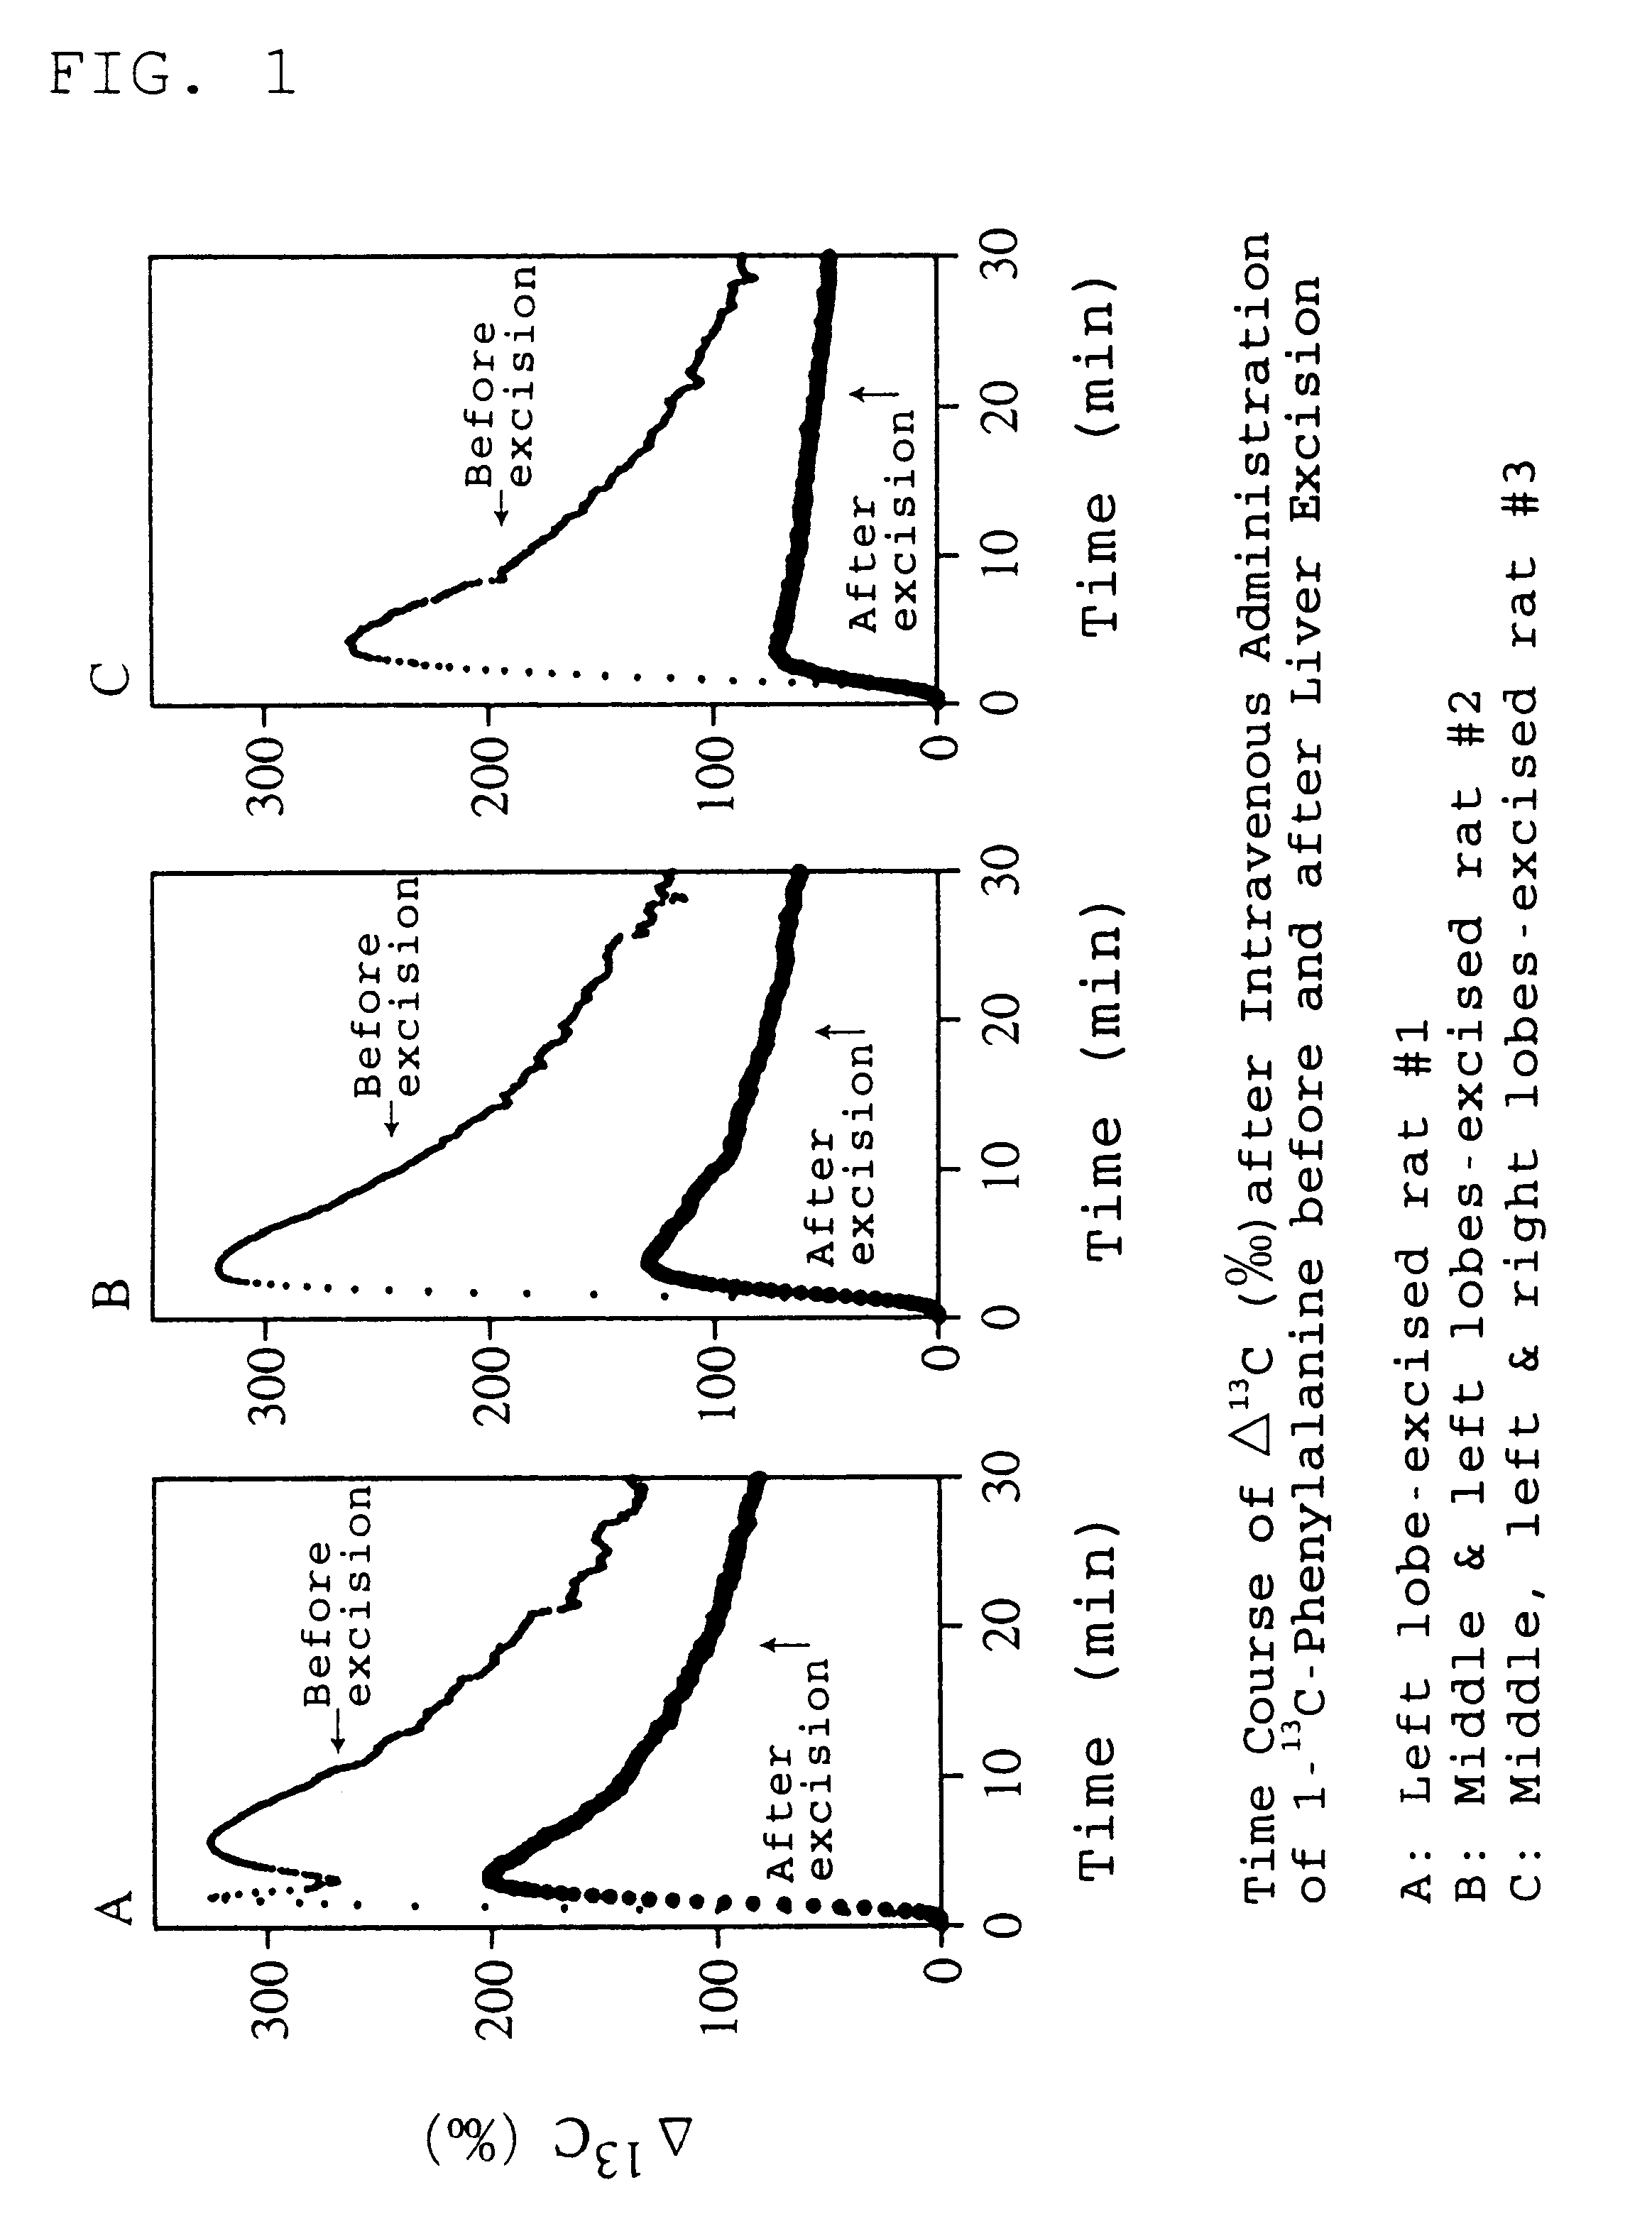 Reagent for evaluating a hepatic operation